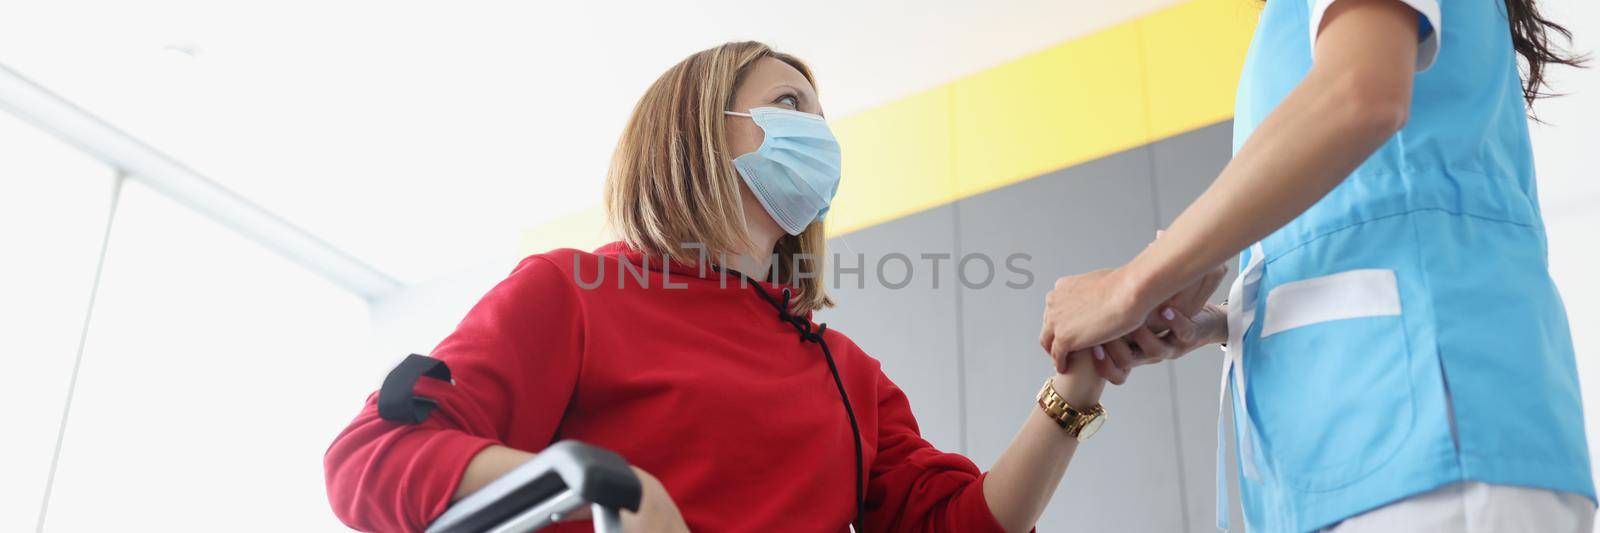 Woman after car crash in clinic by kuprevich